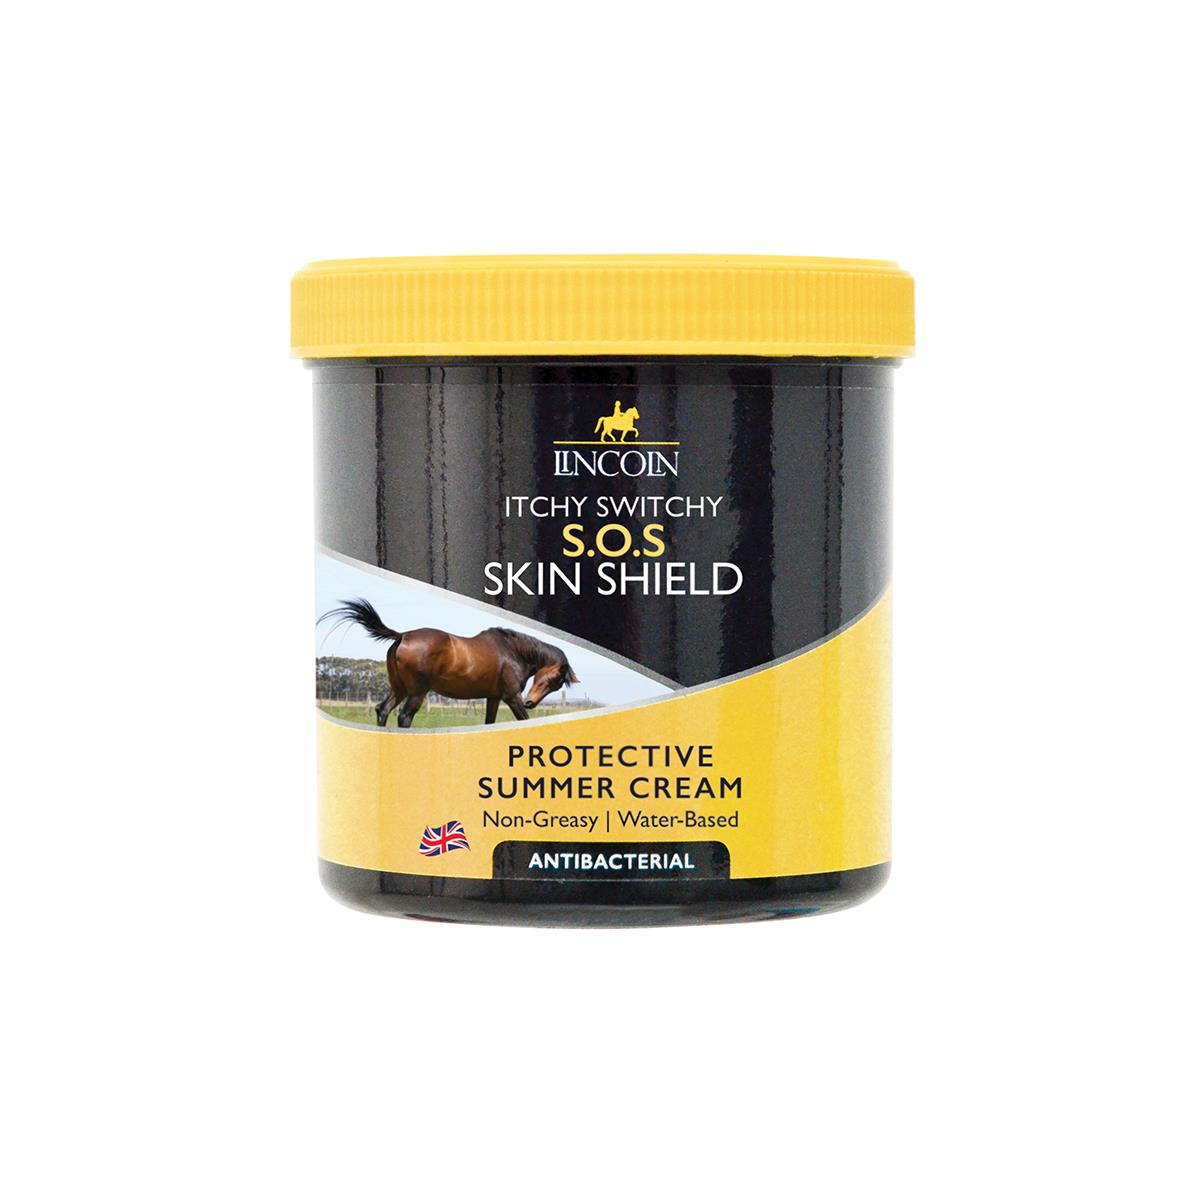 Lincoln Itchy Switchy S.O.S Skin Shield: Your horse's ultimate defense against irritating insect bites